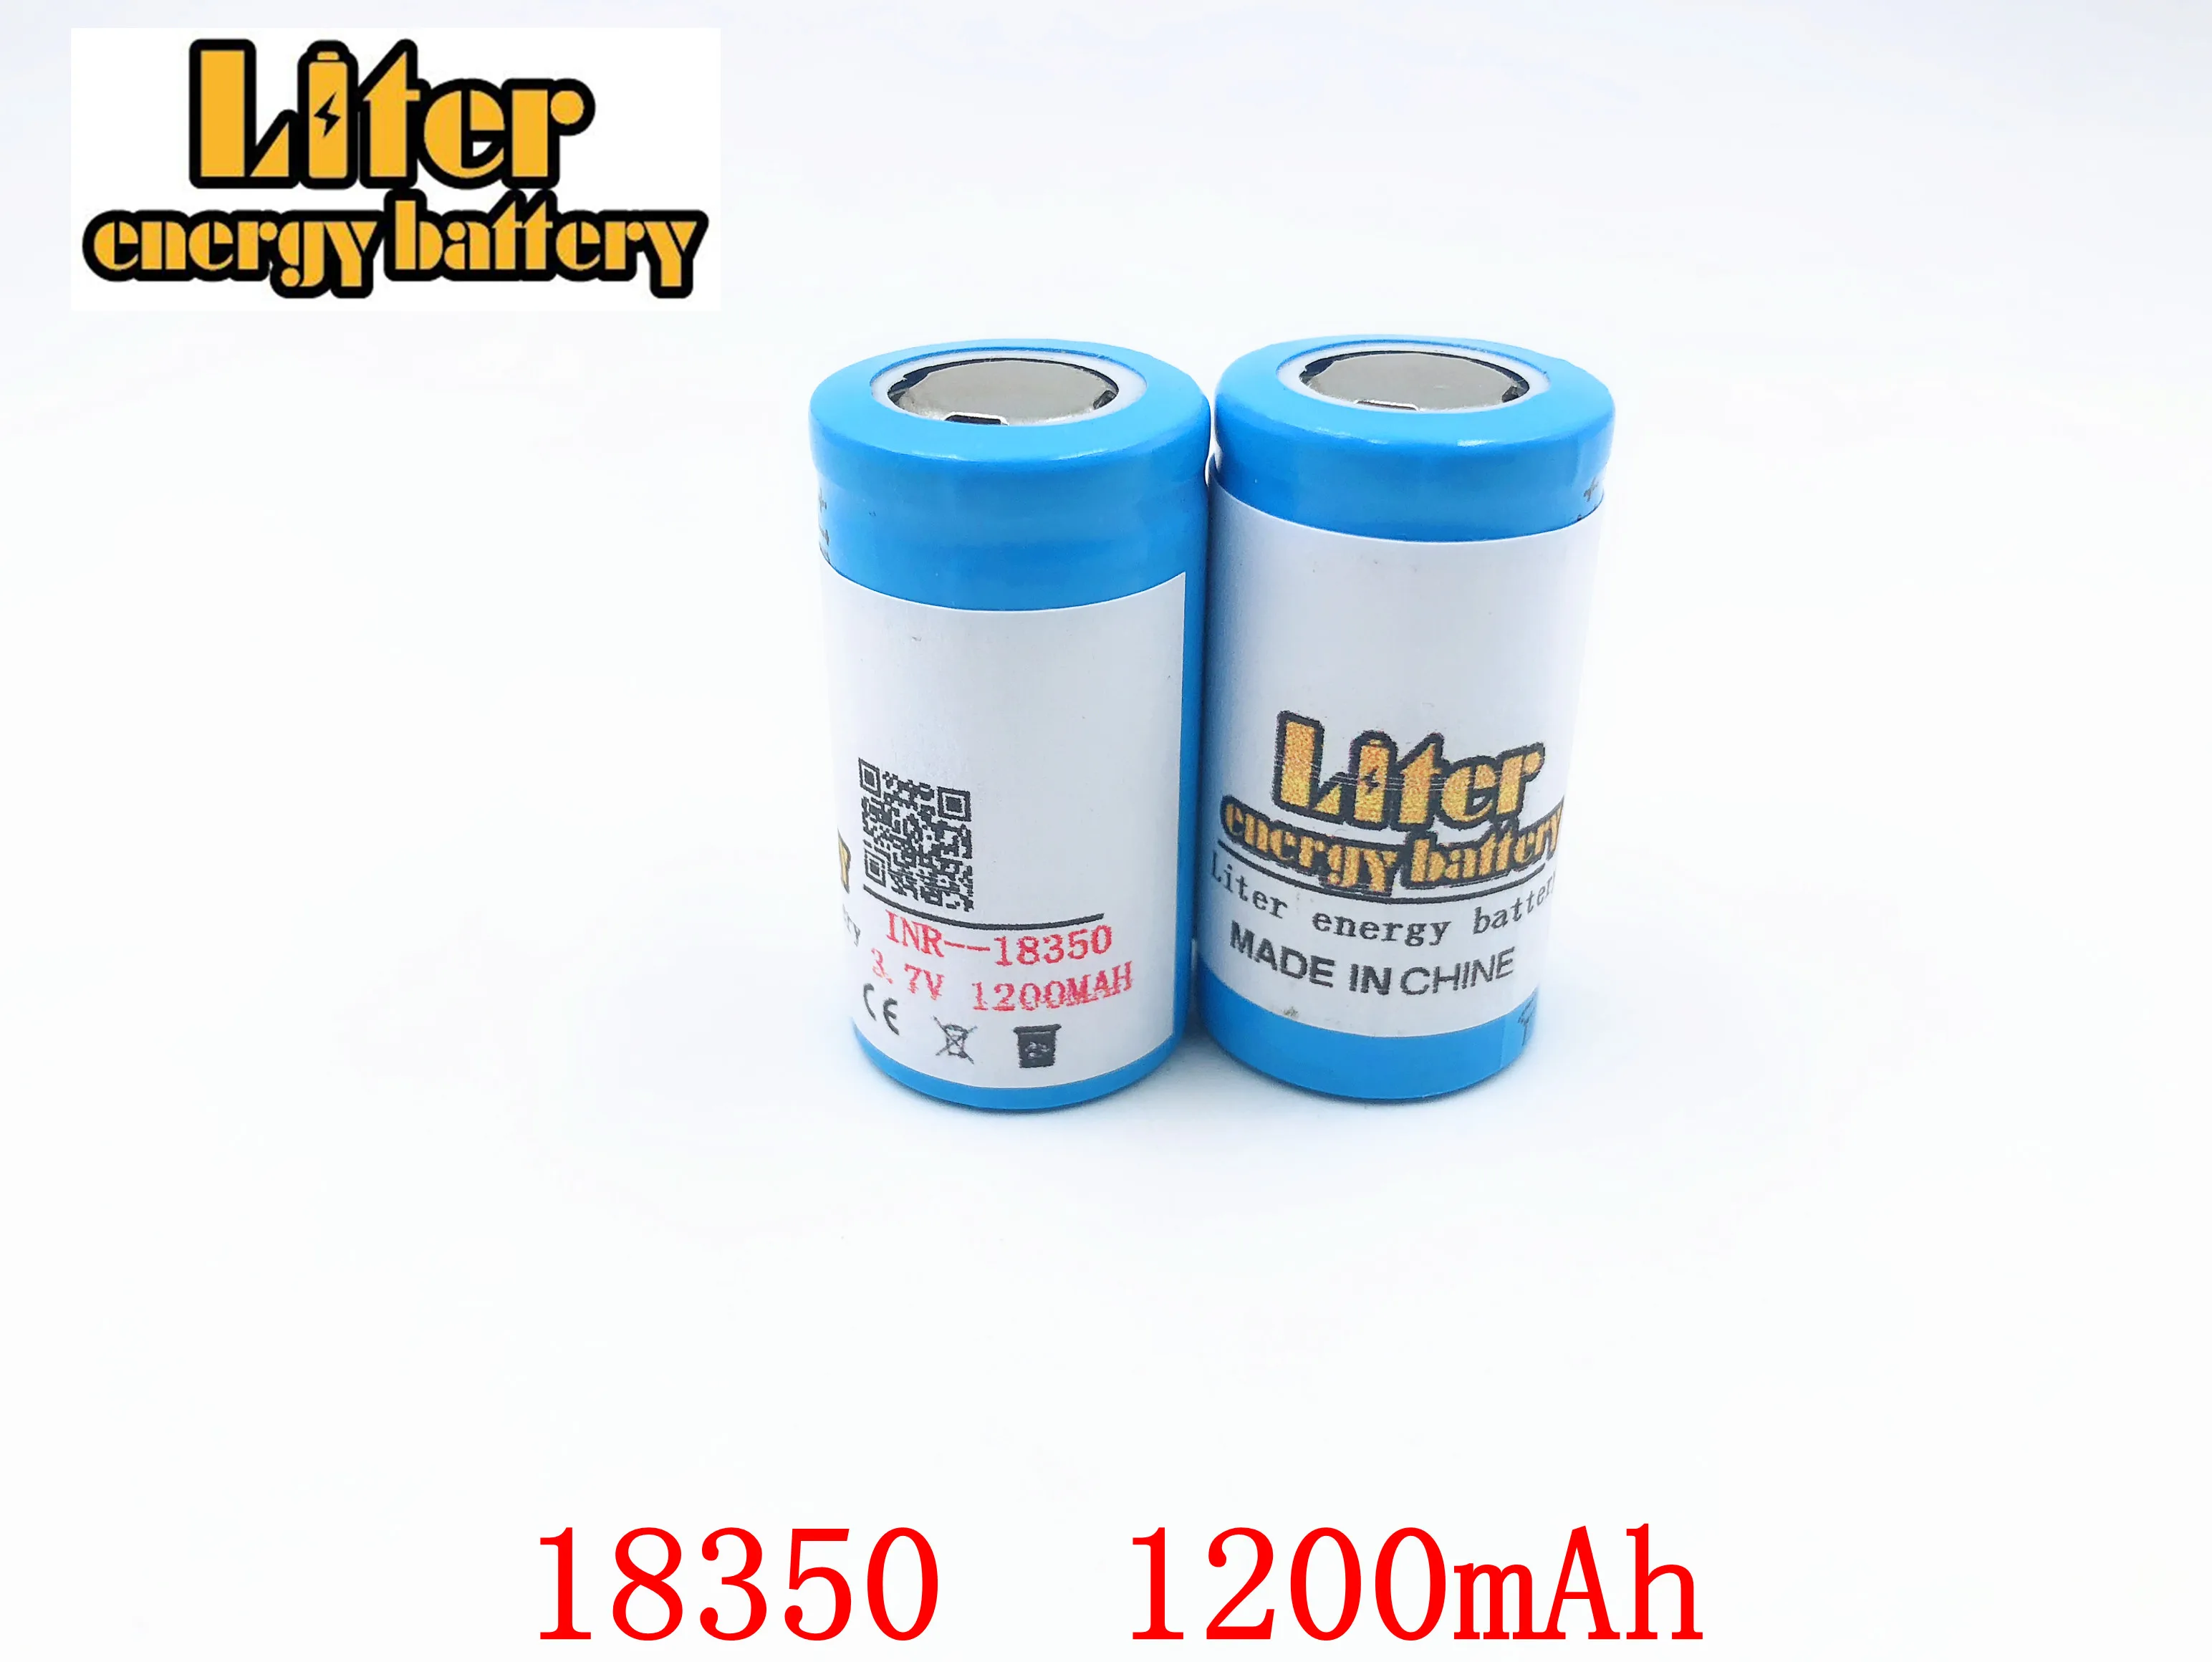 

2PCS Liter energy battery 18350 battery 1200mAh 3.7V Li-ion Rechargeable Battery with battery protective storage box